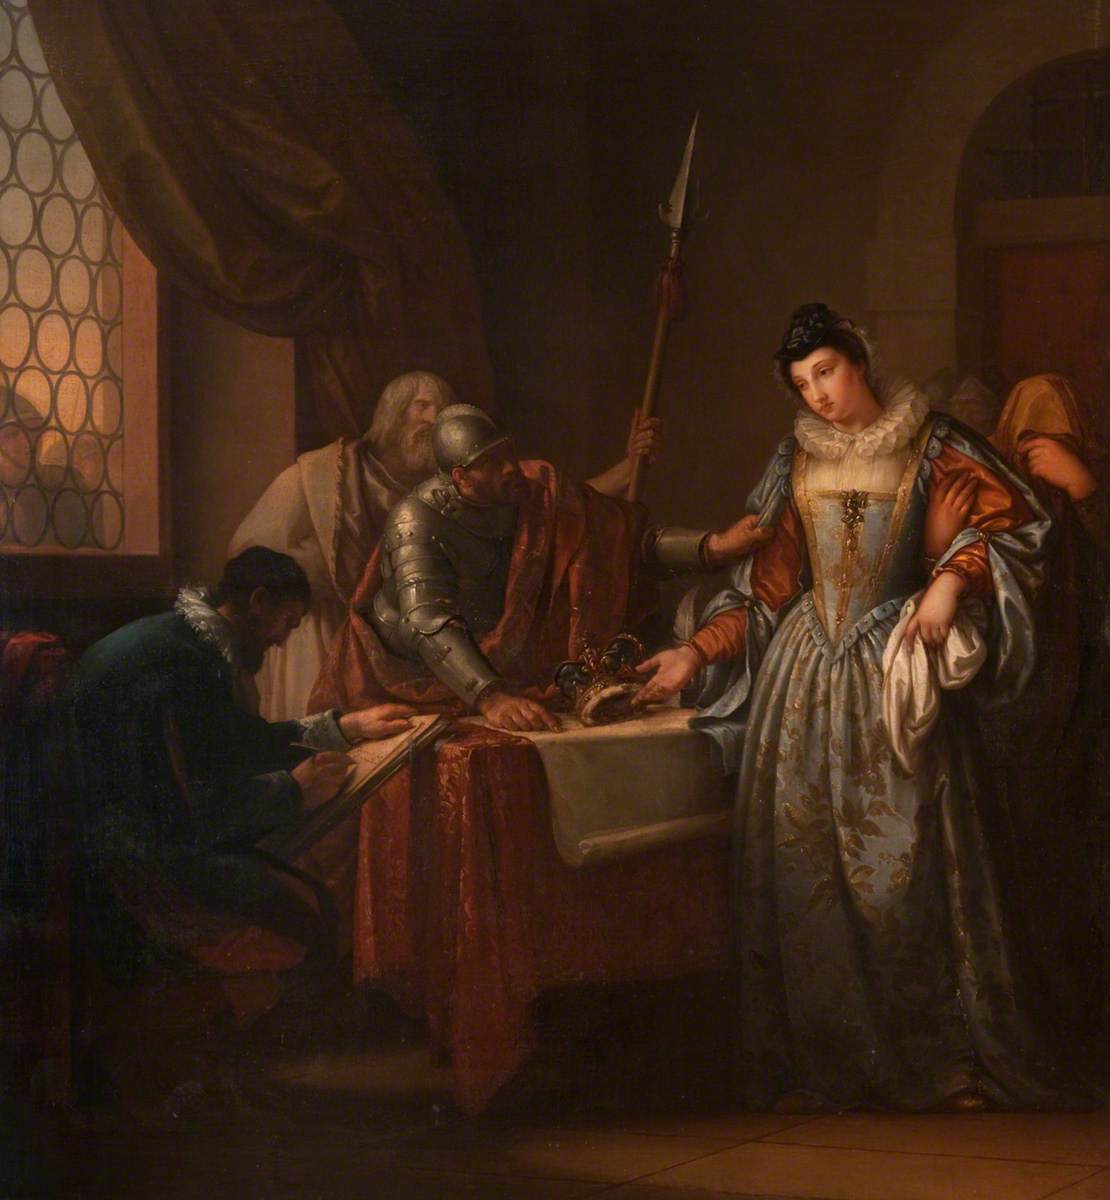 The Abdication of Mary, Queen of Scots